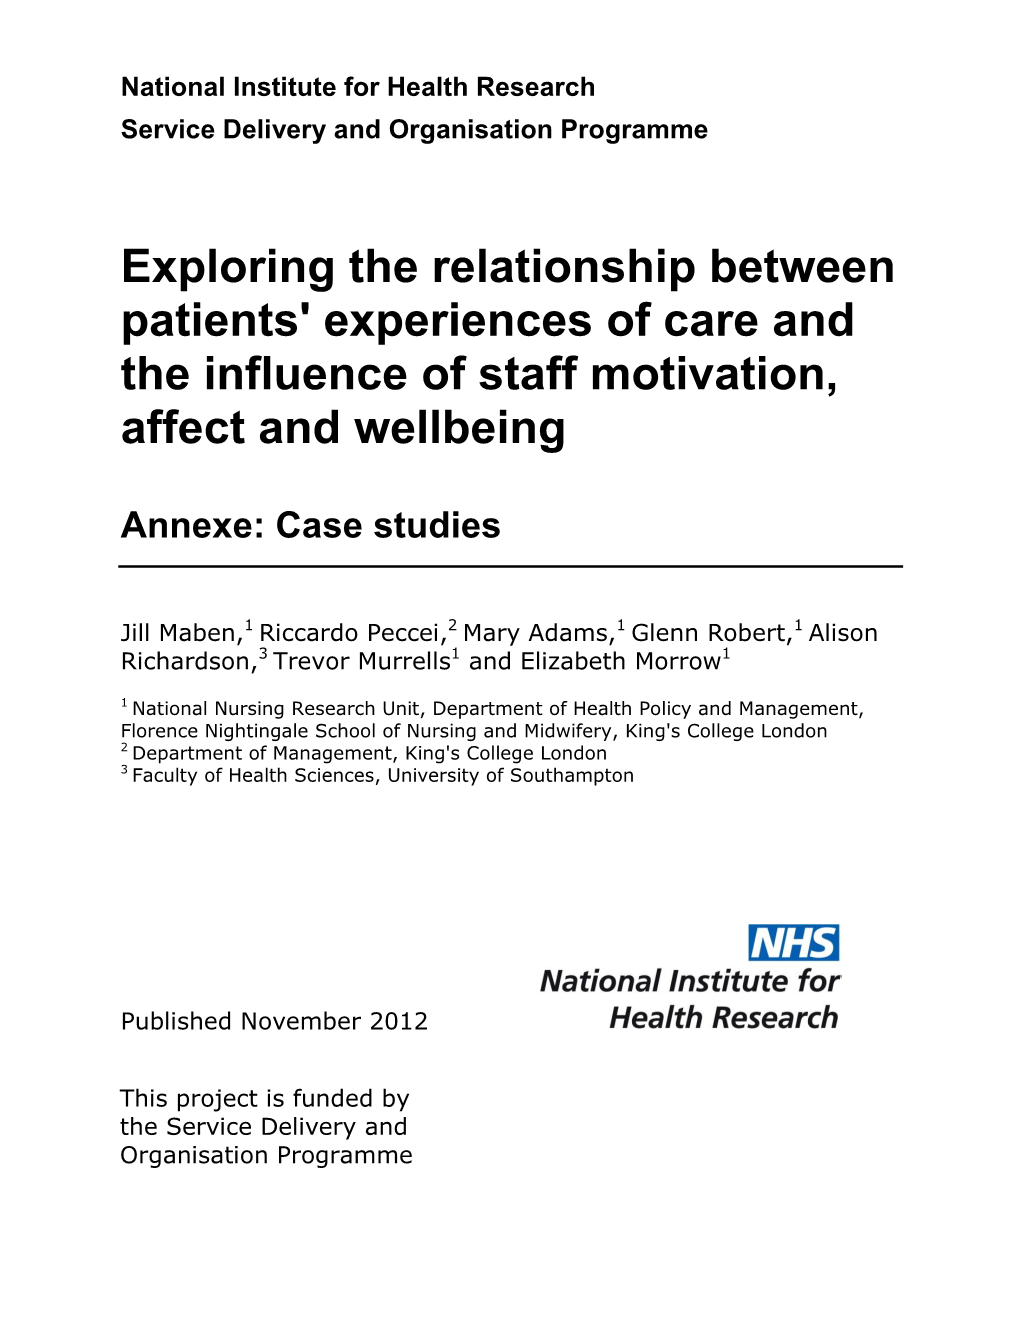 Exploring the Relationship Between Patients' Experiences of Care and the Influence of Staff Motivation, Affect and Wellbeing